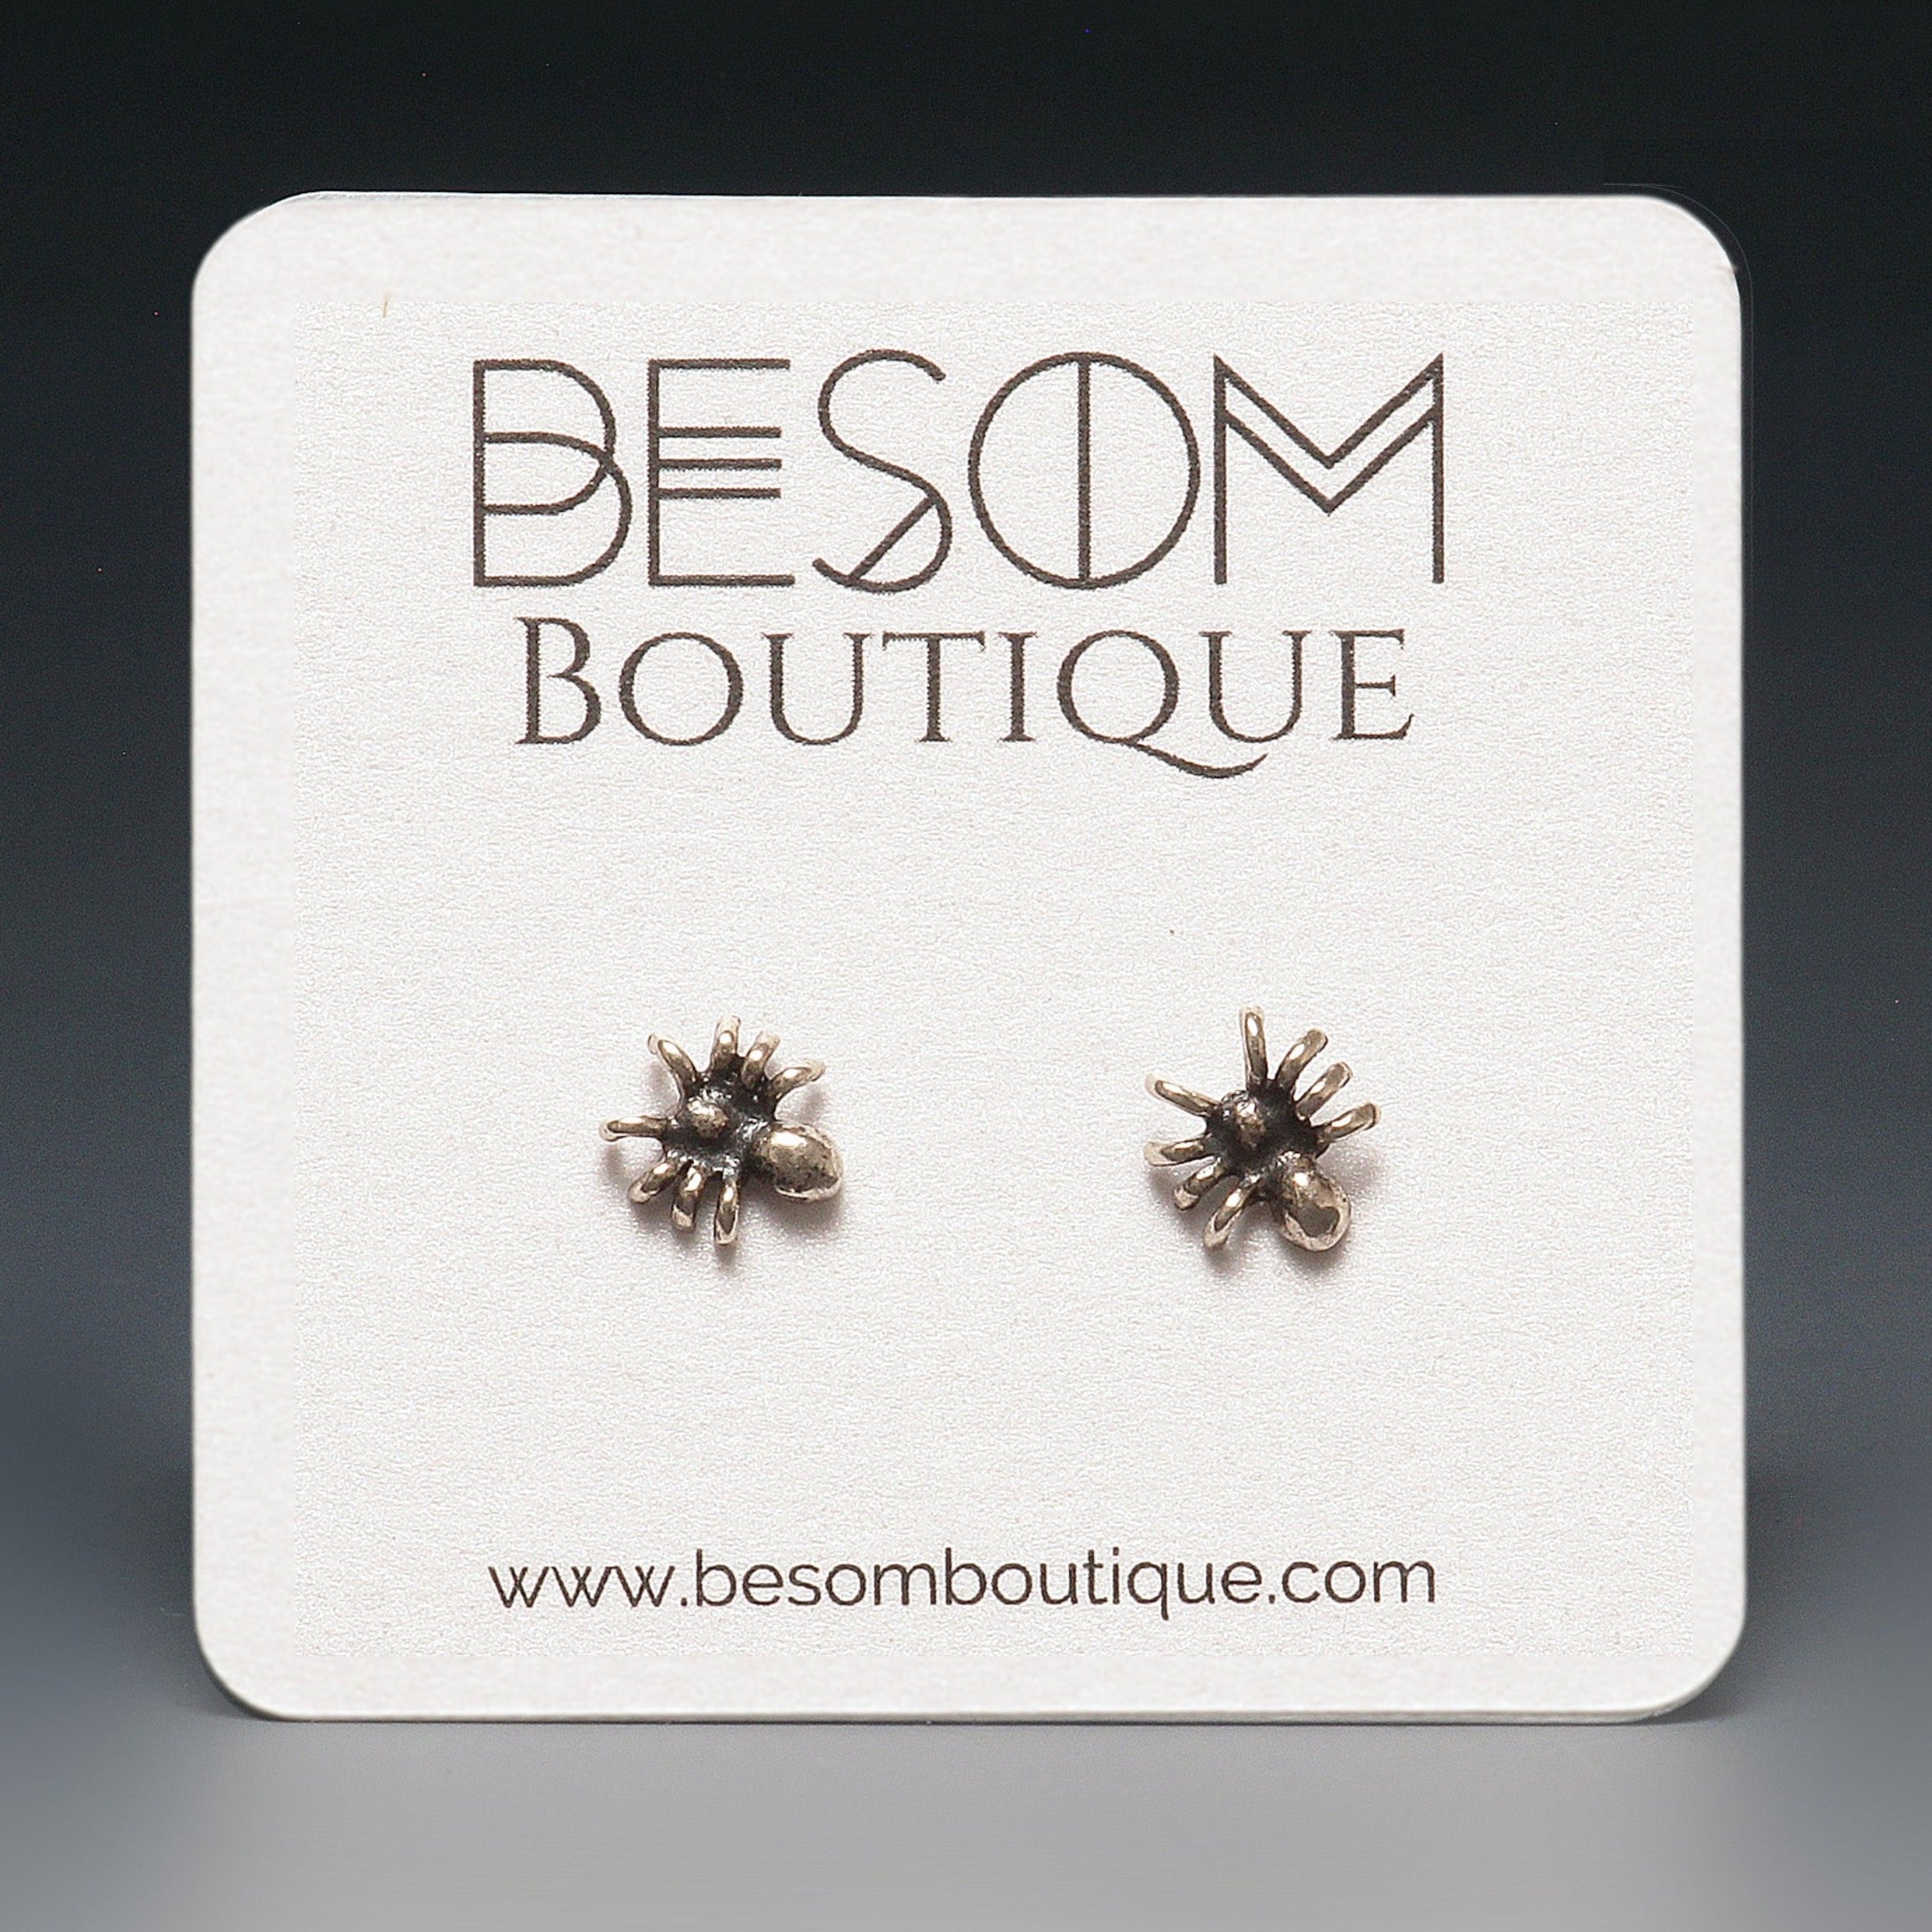 Spider Stud Earrings in Silver Besom Boutique